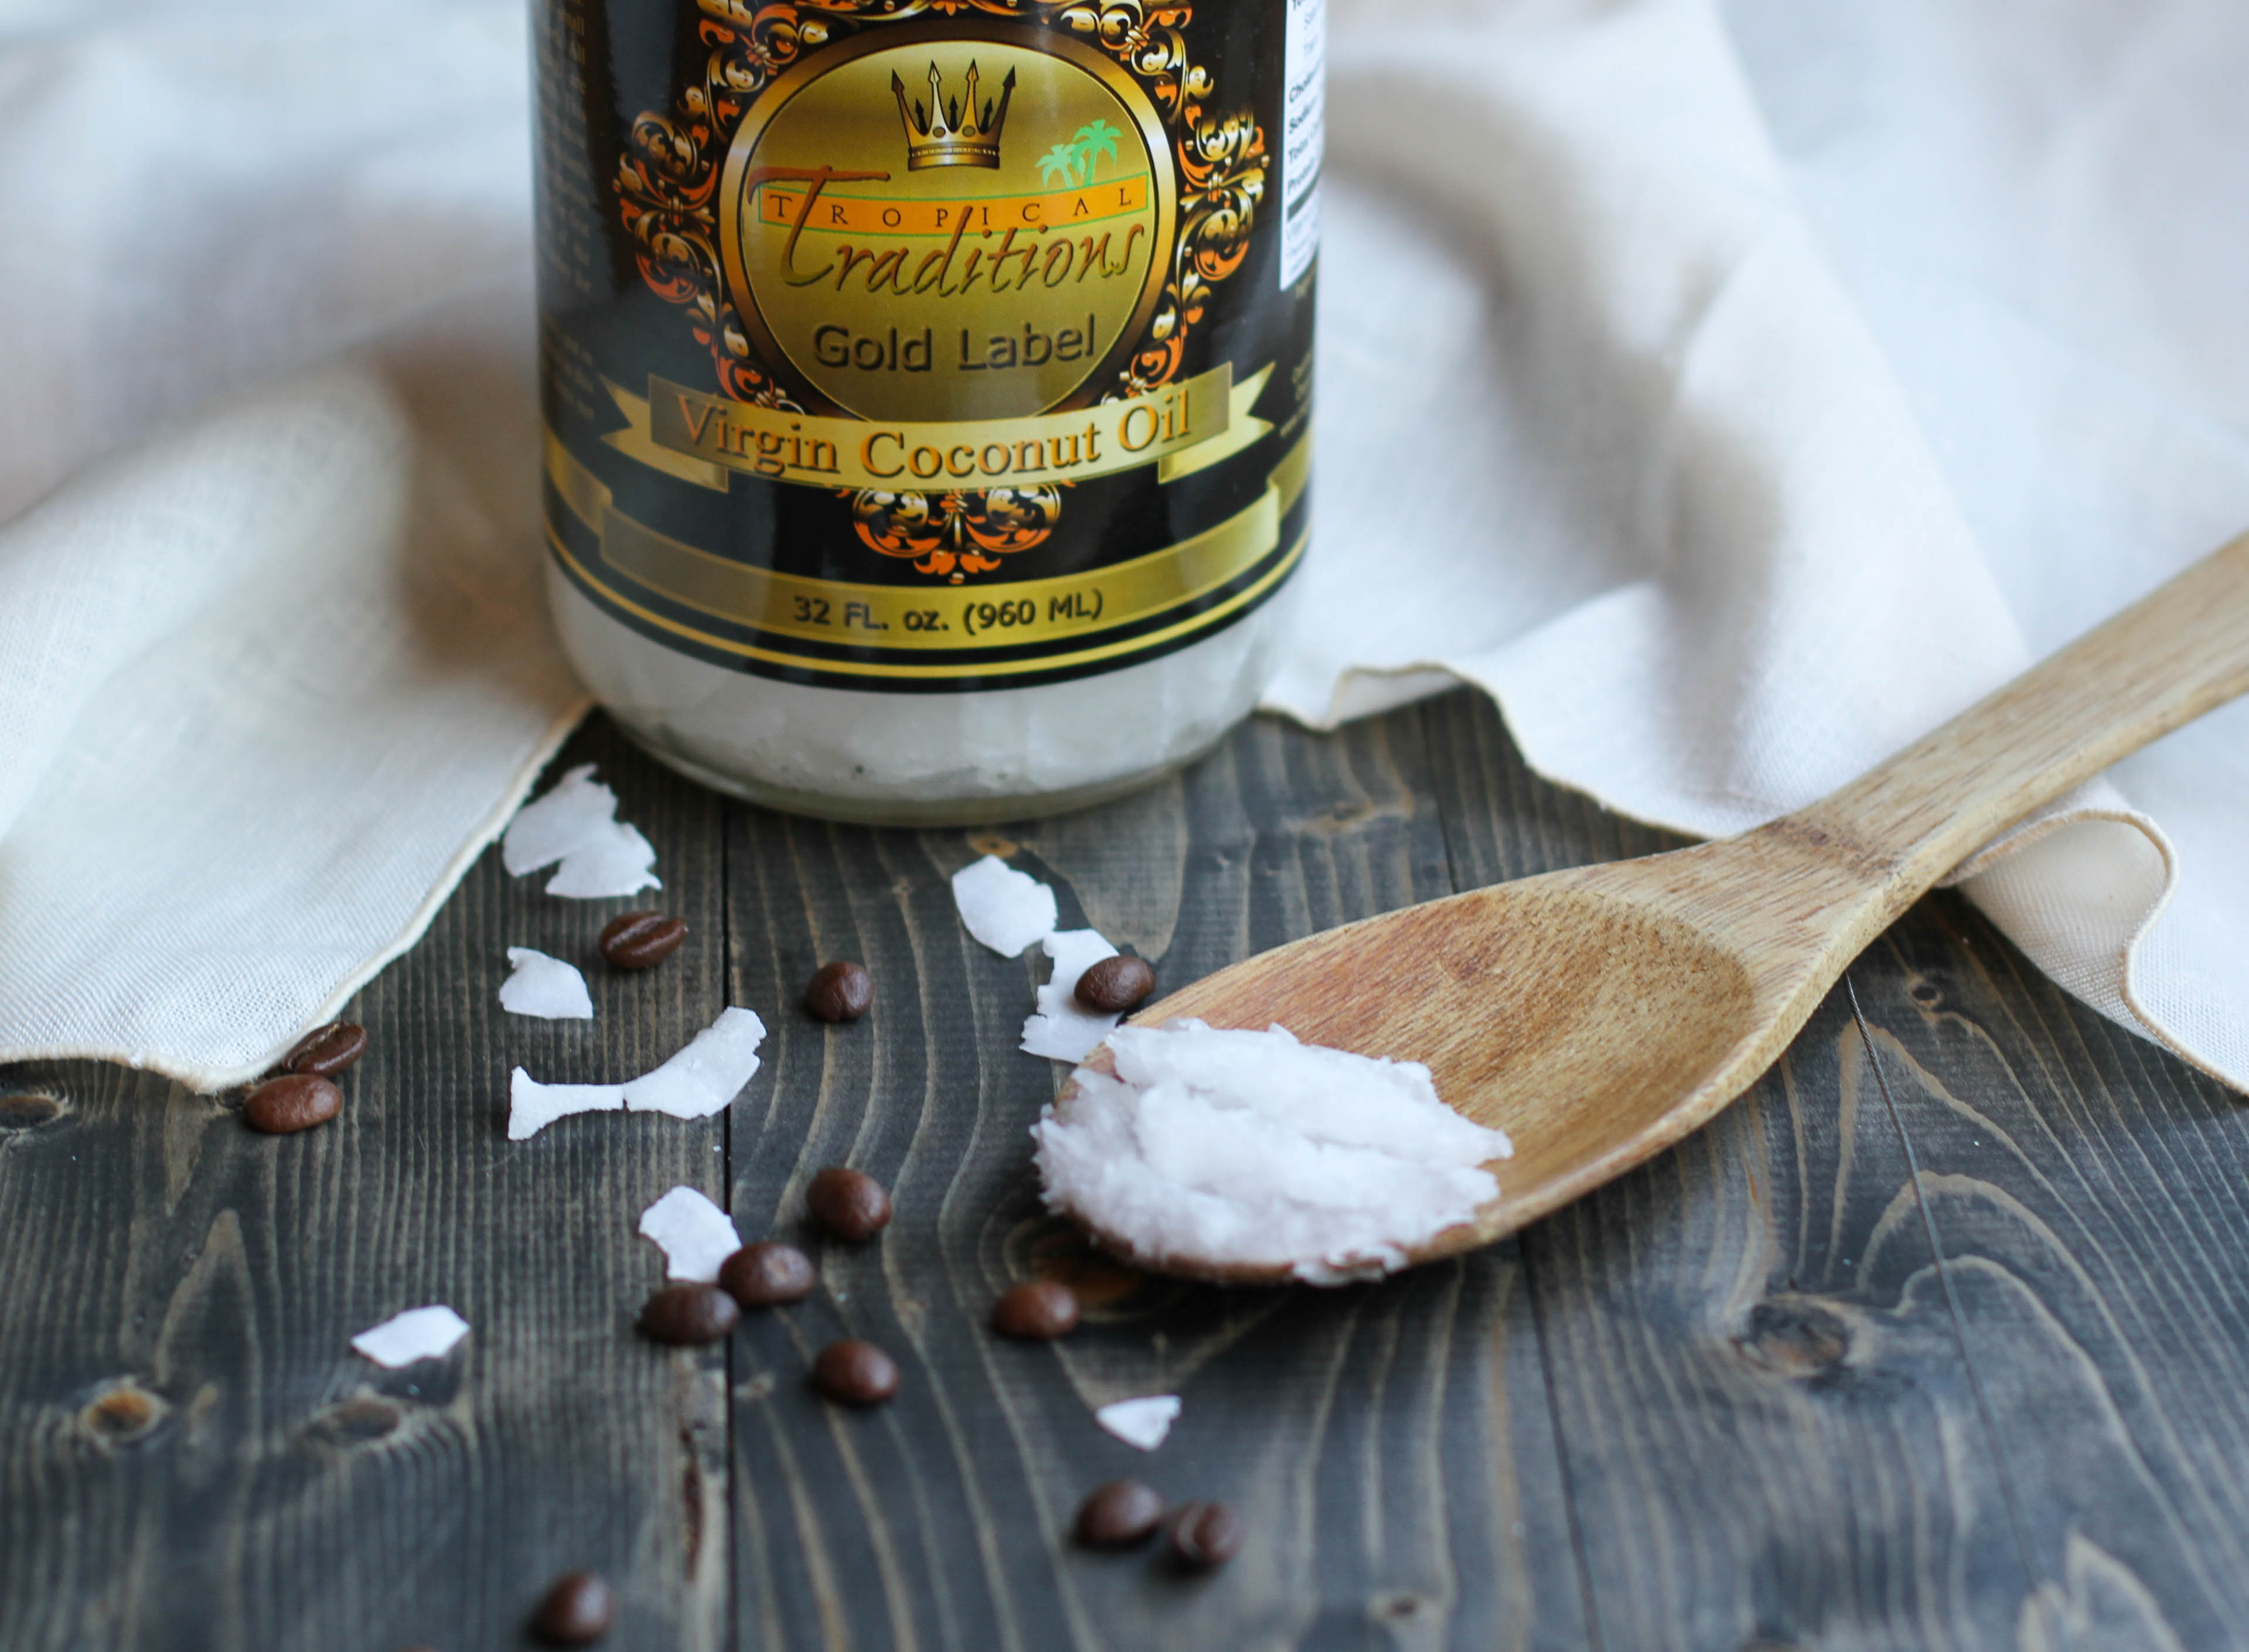 Coconut Contentment - Tropical Traditions Coconut Oil Review